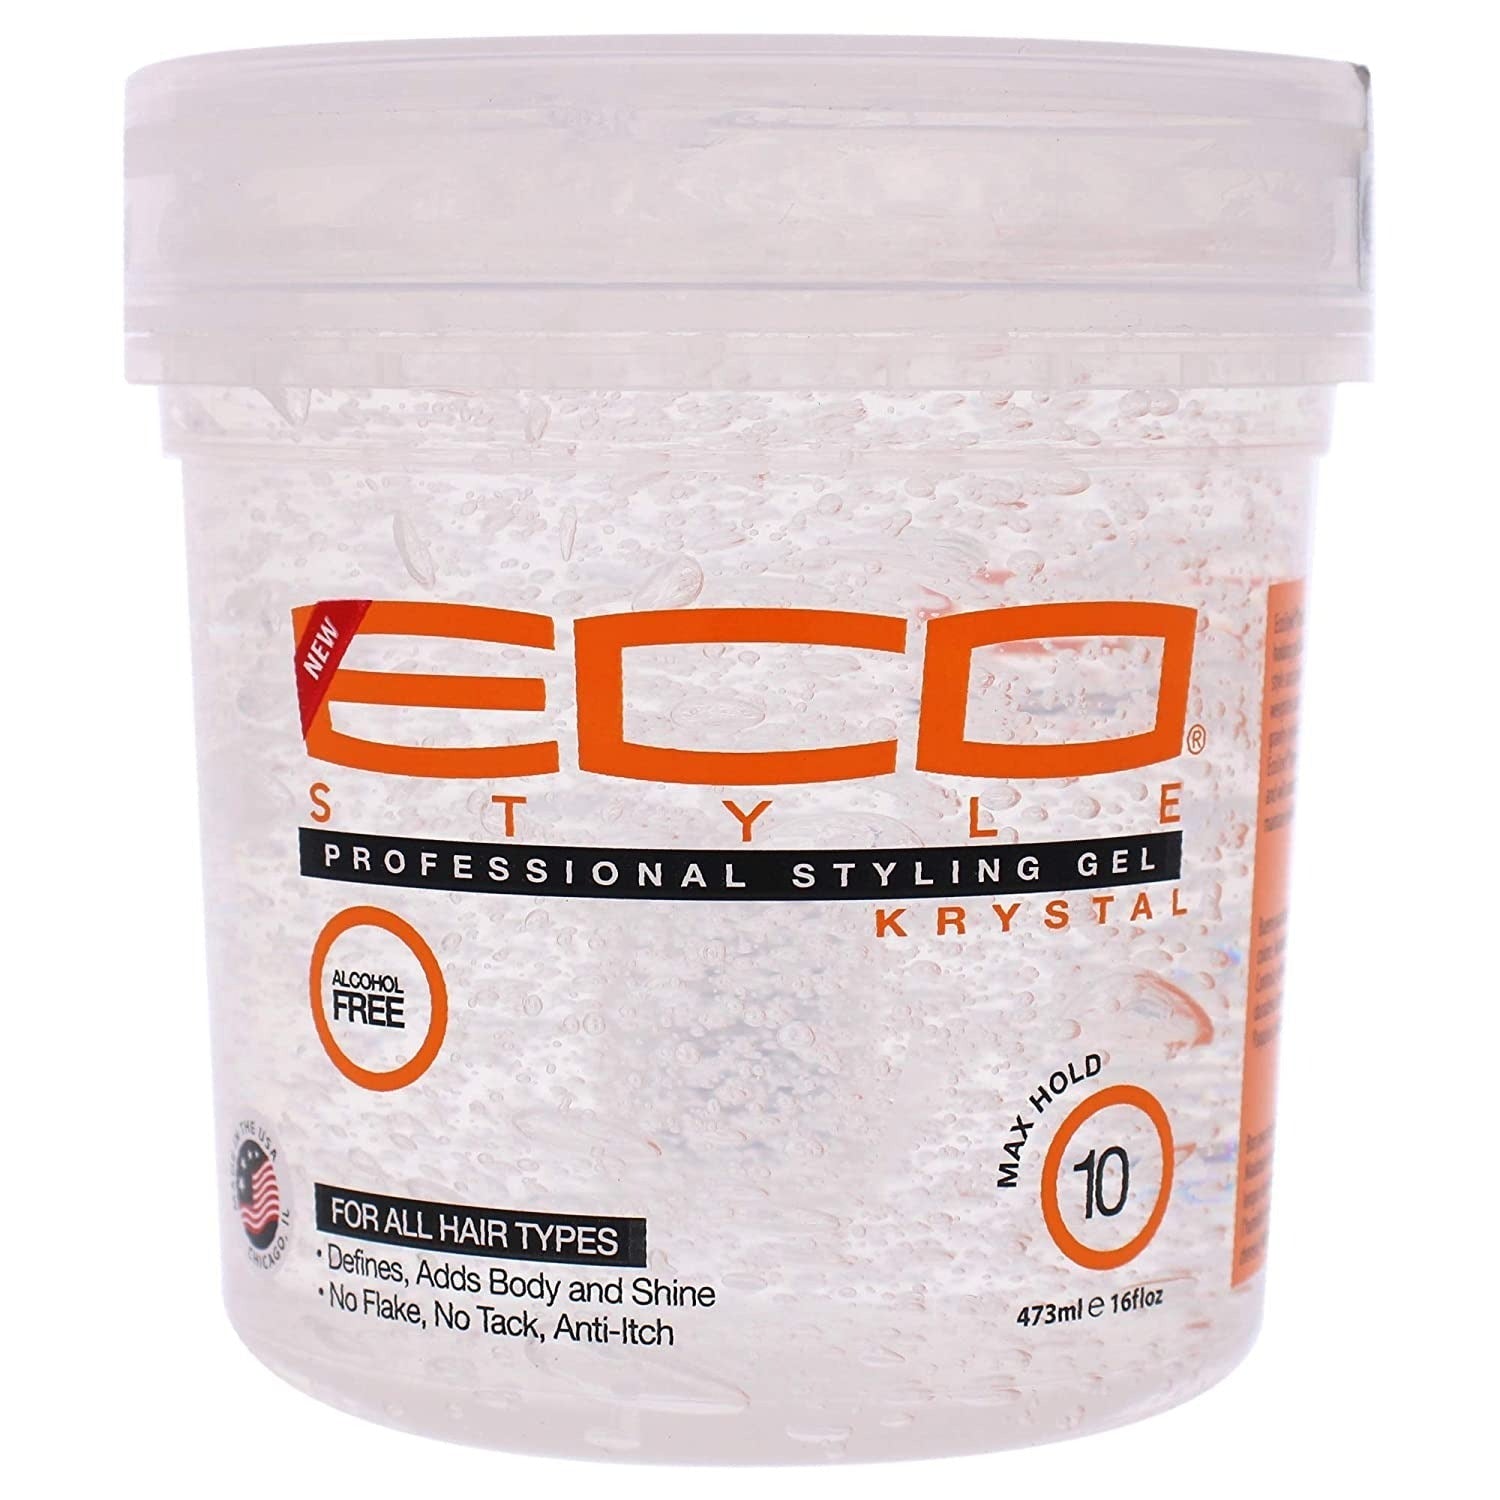 Eco Styling Gel Krystal -  : Beauty Supply, Fashion, and  Jewelry Wholesale Distributor